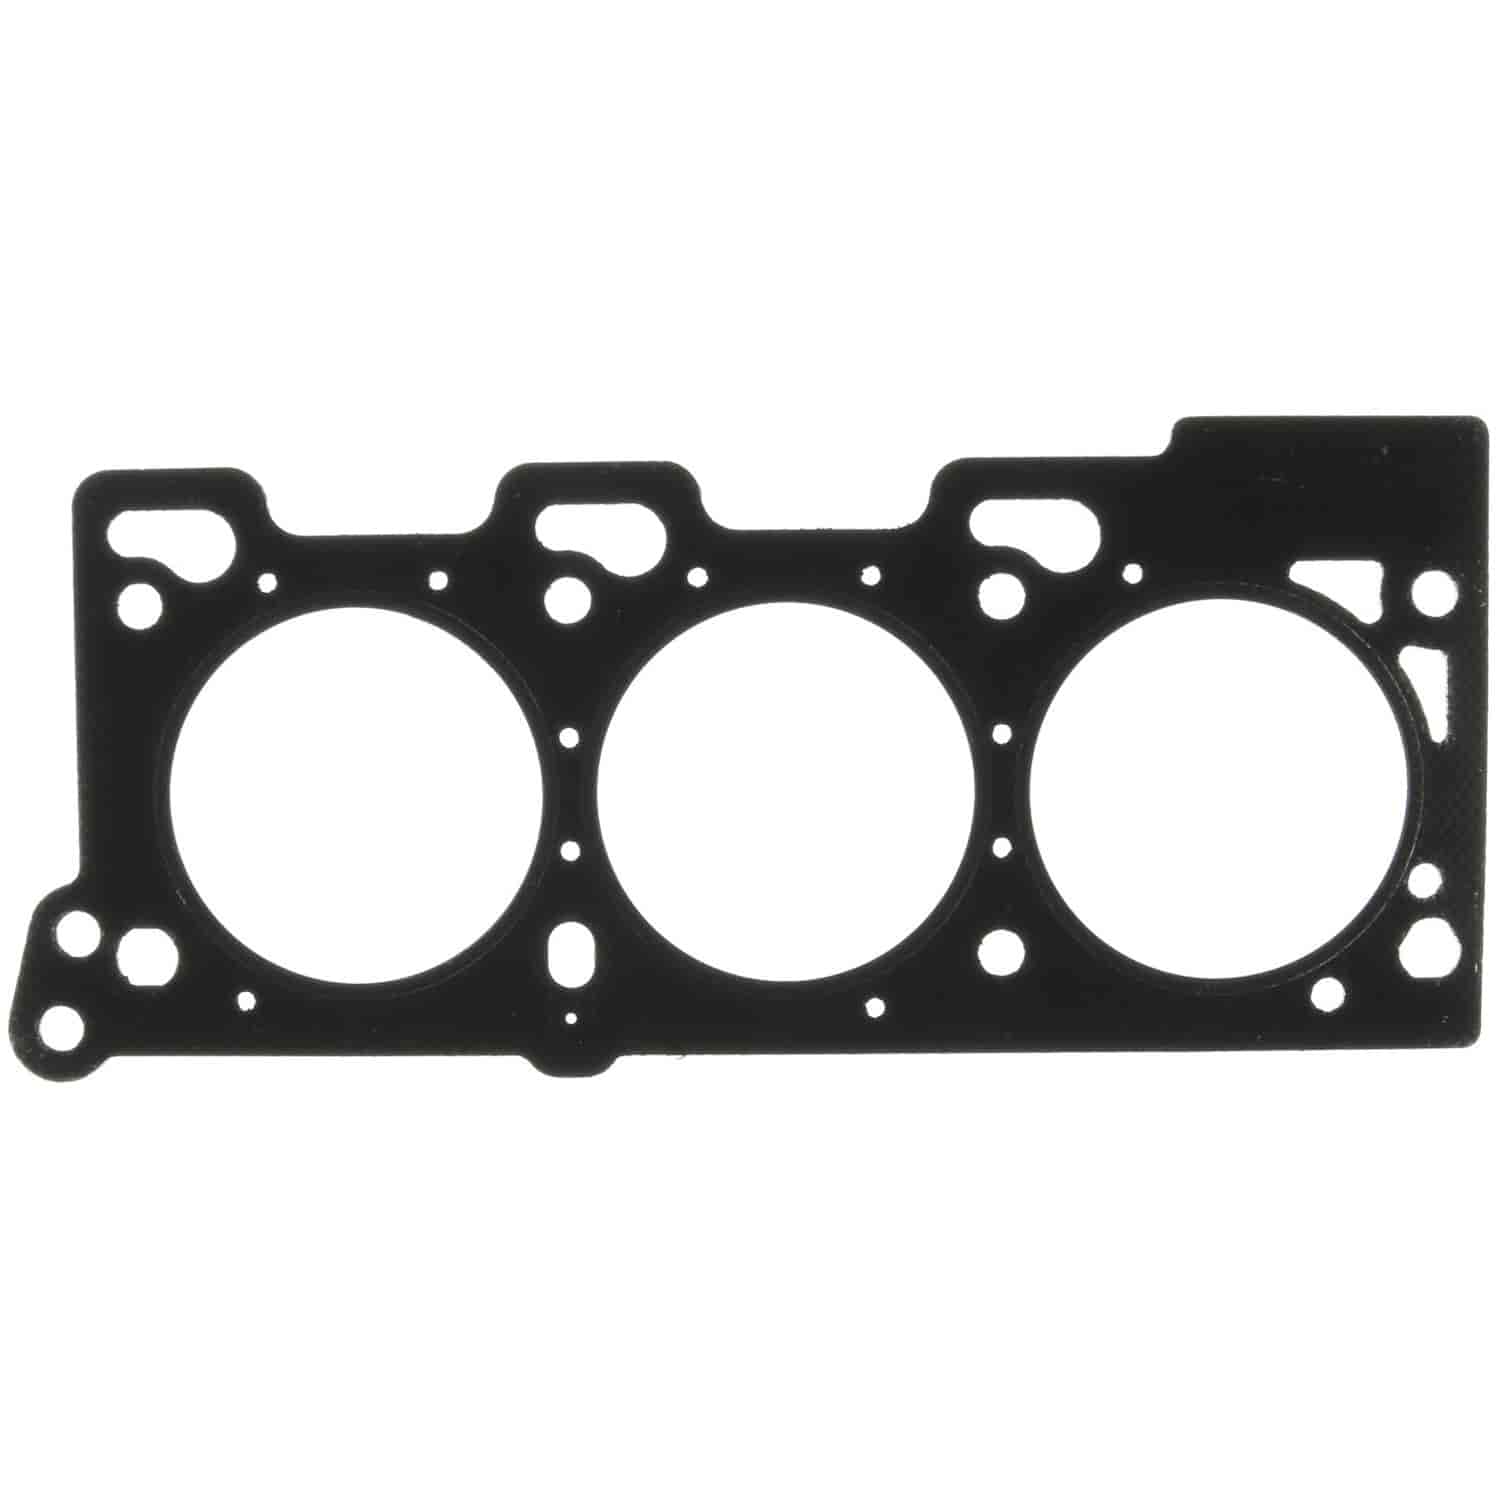 Cylinder Head Gasket Chry-Pass 215 3.5L Eng. 1993-96